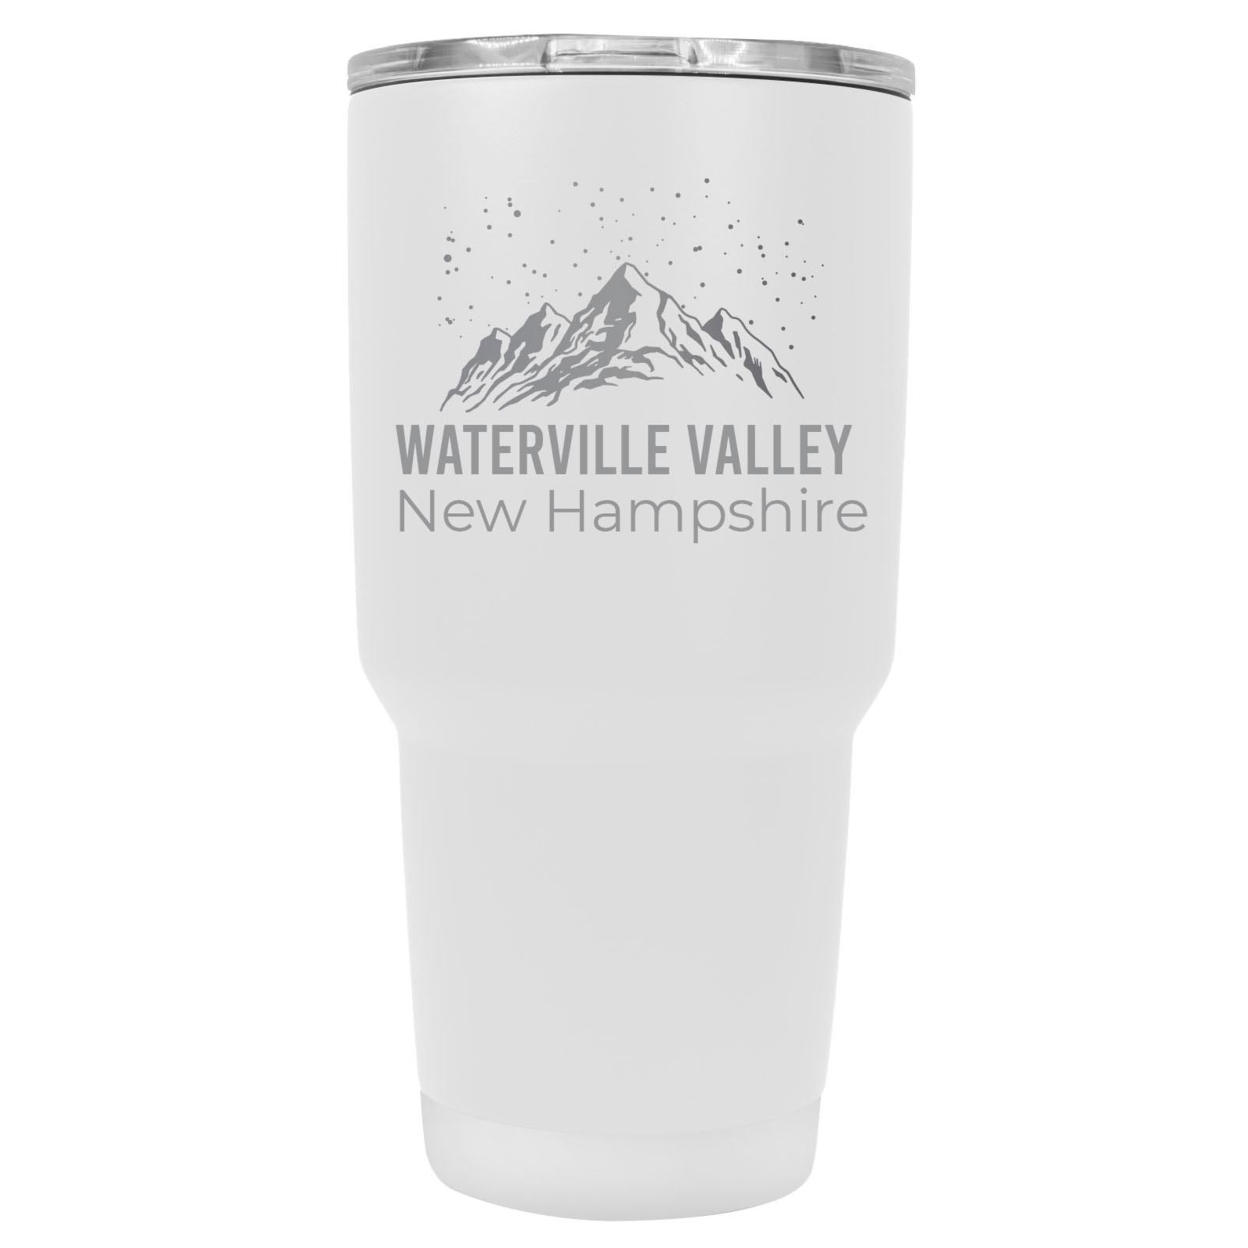 Waterville Valley New Hampshire Ski Snowboard Winter Souvenir Laser Engraved 24 Oz Insulated Stainless Steel Tumbler - White